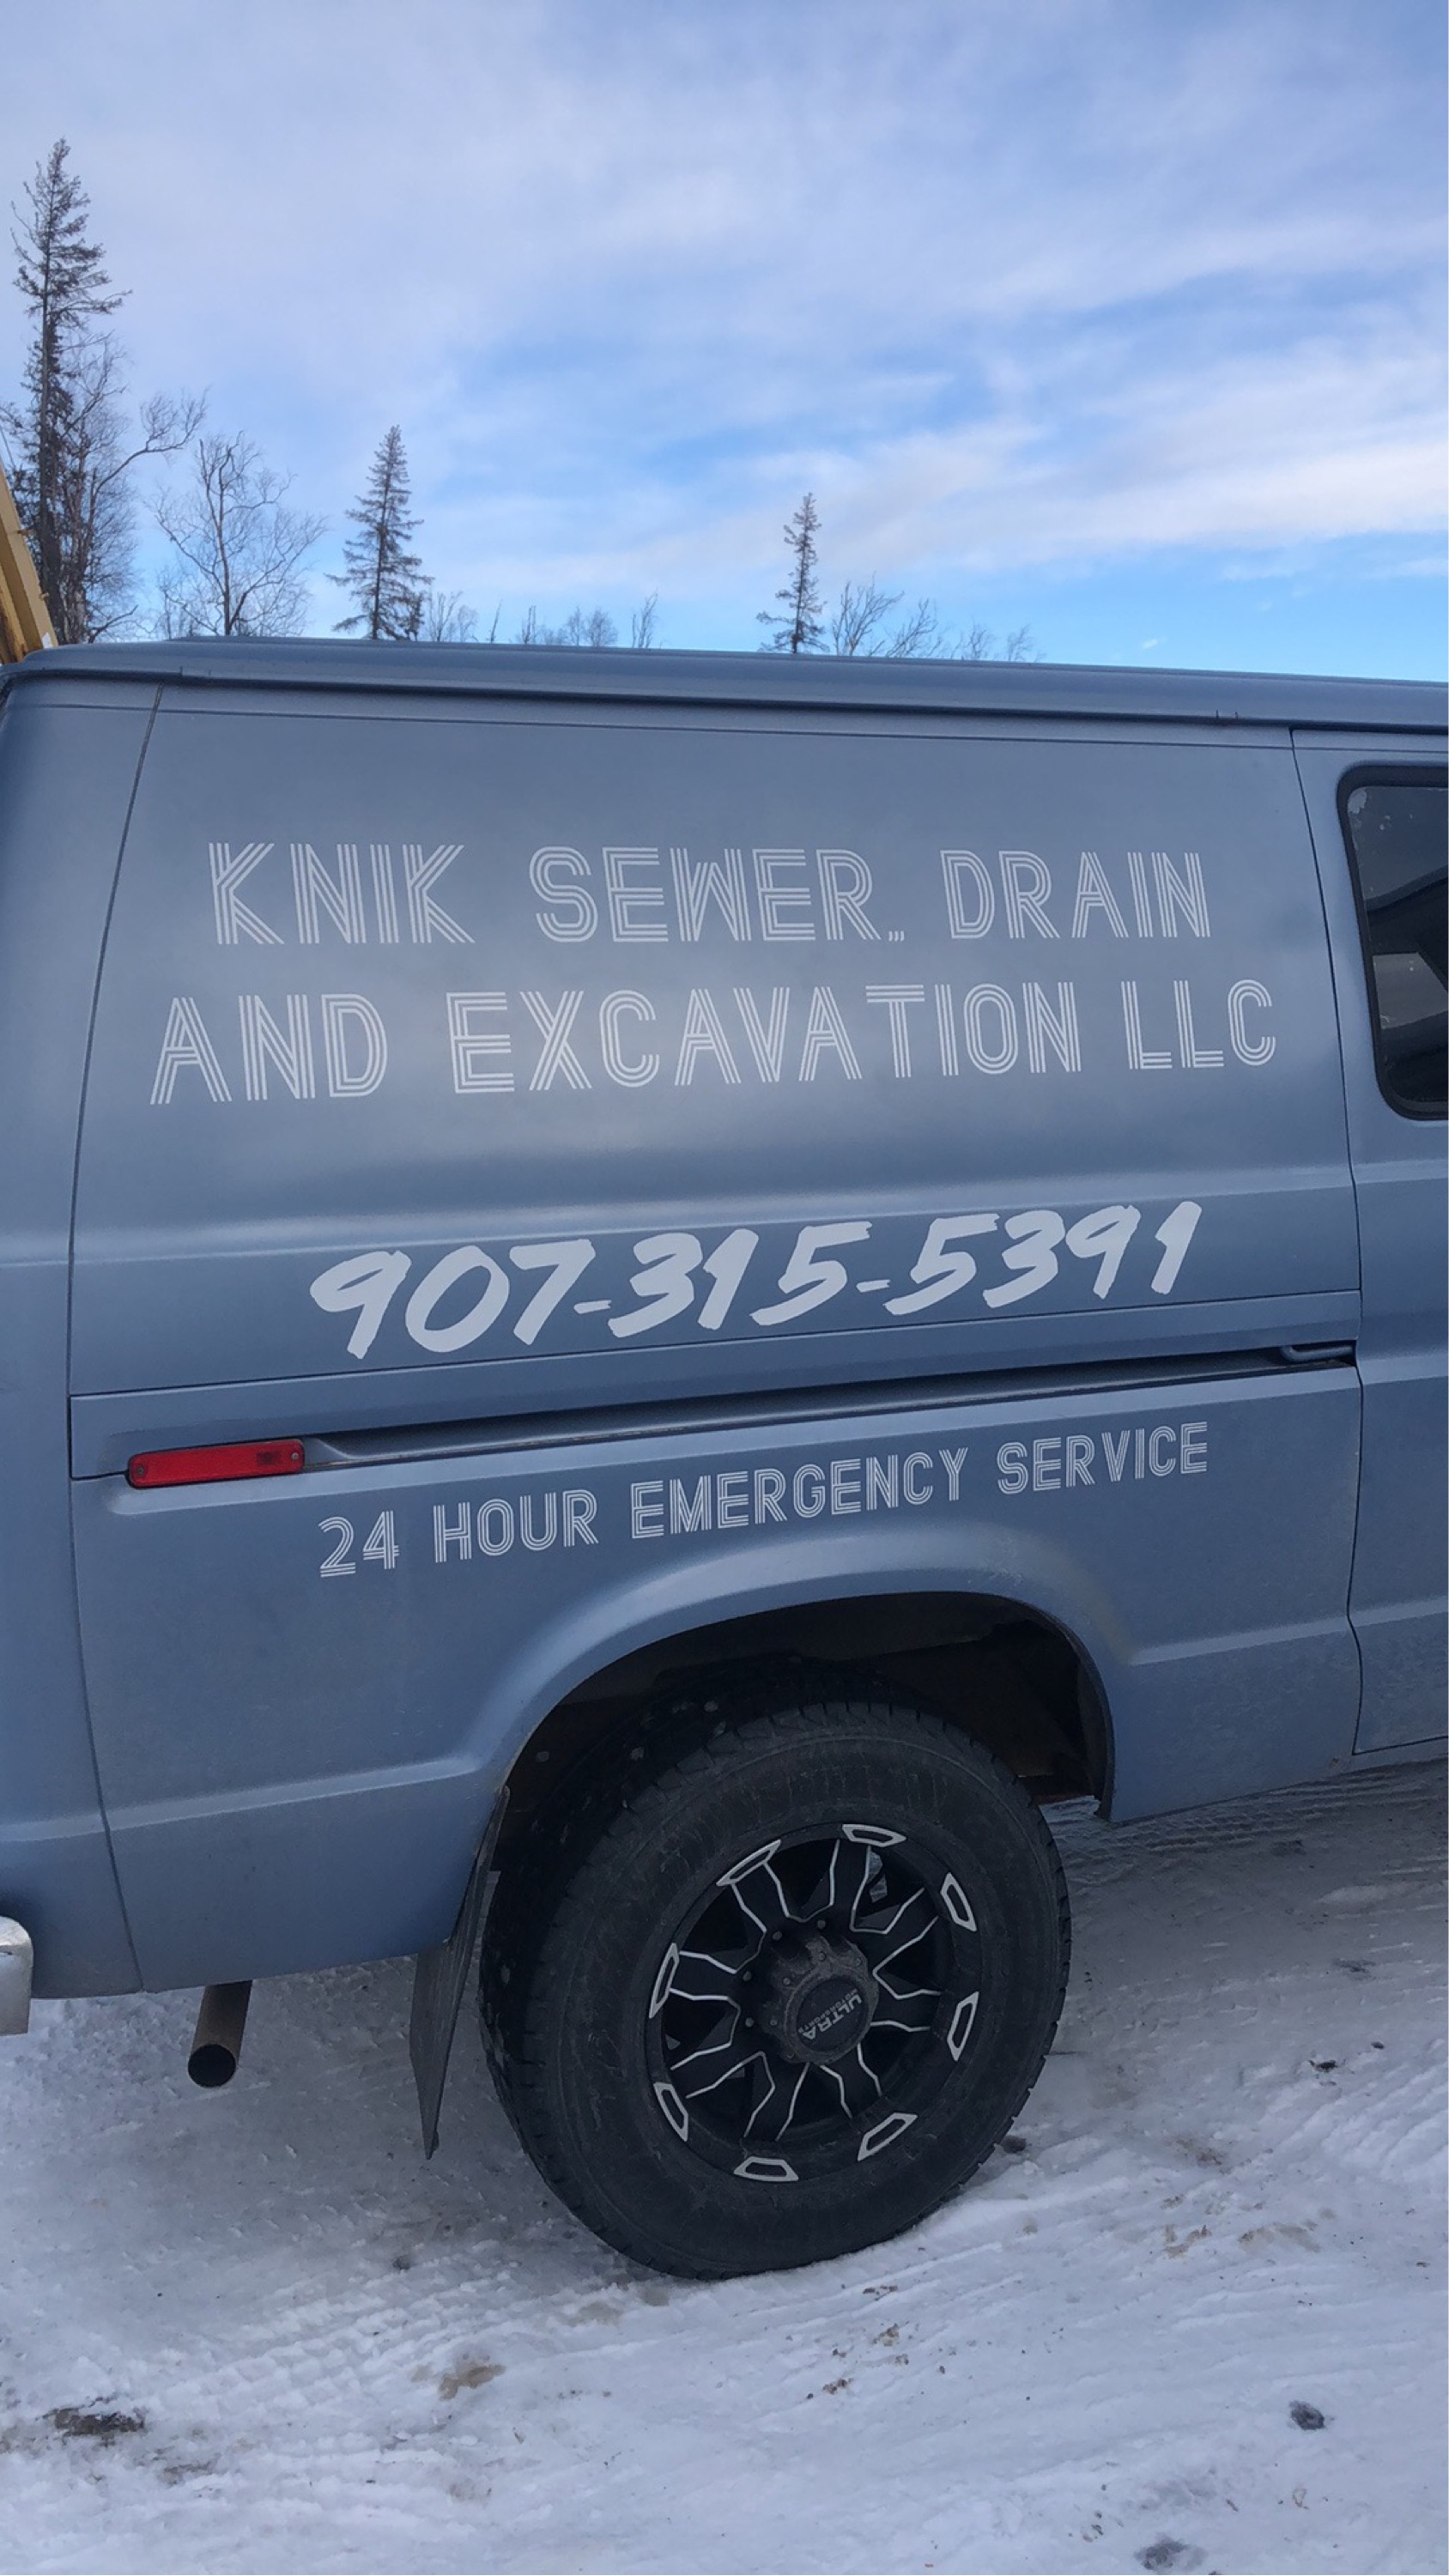 Knik Sewer, Drain and Excavation Logo